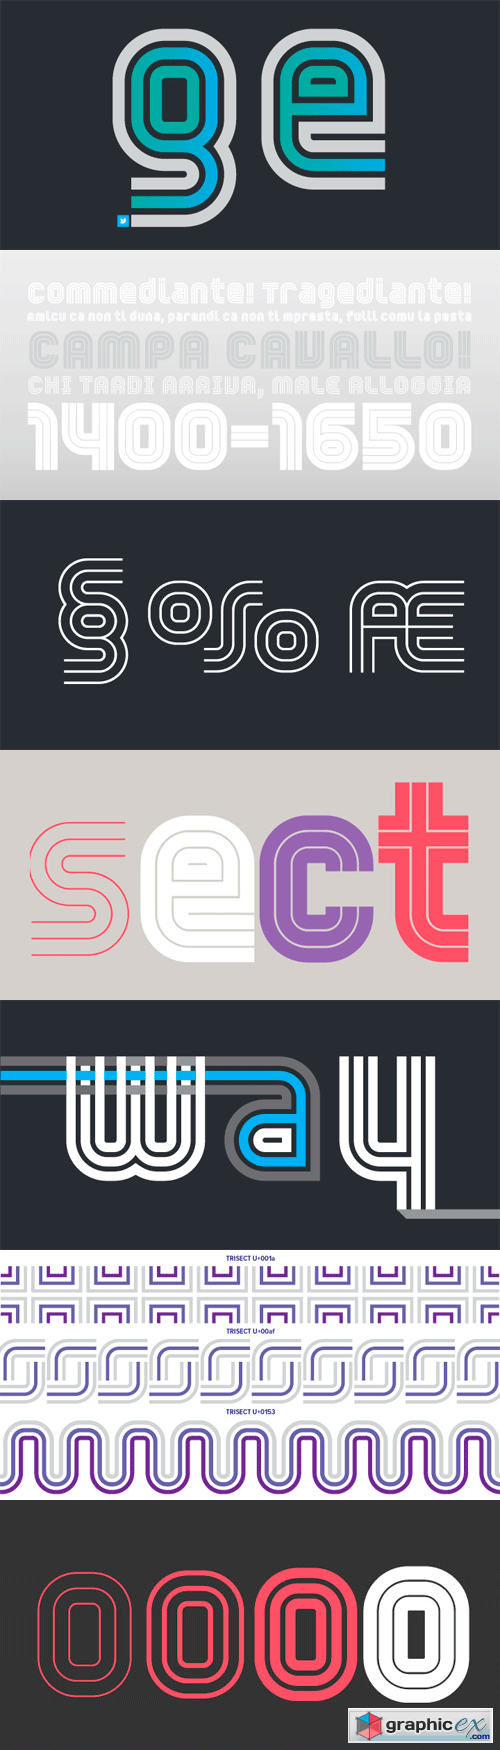 YWFT Trisect Font Family - 8 Fonts for $100